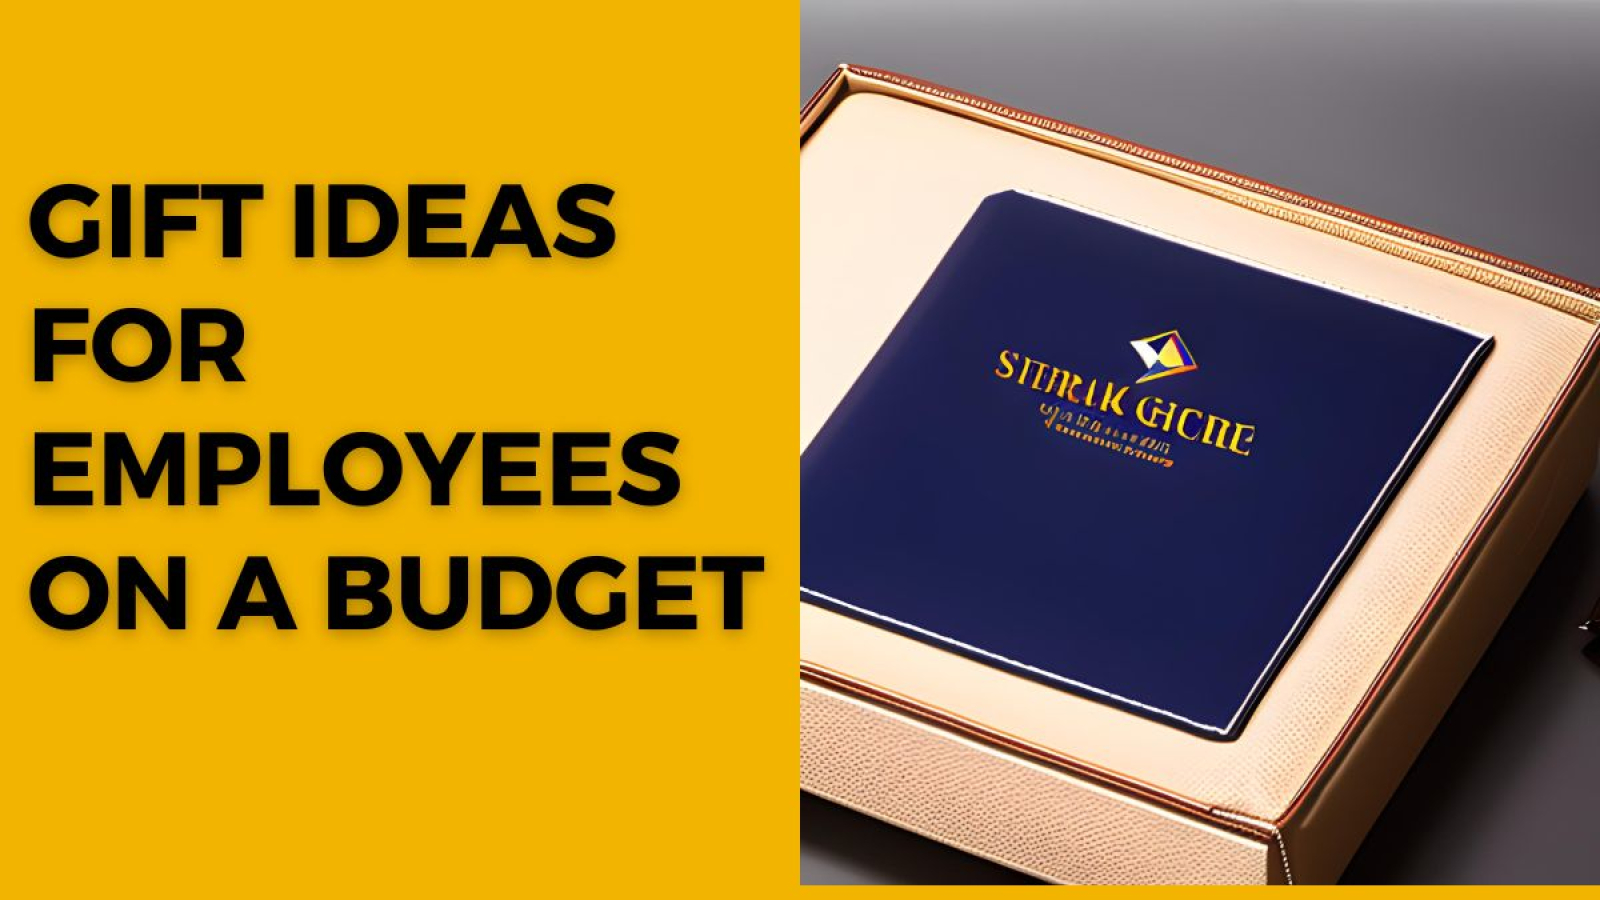 Gift Ideas for Employees on a Budget